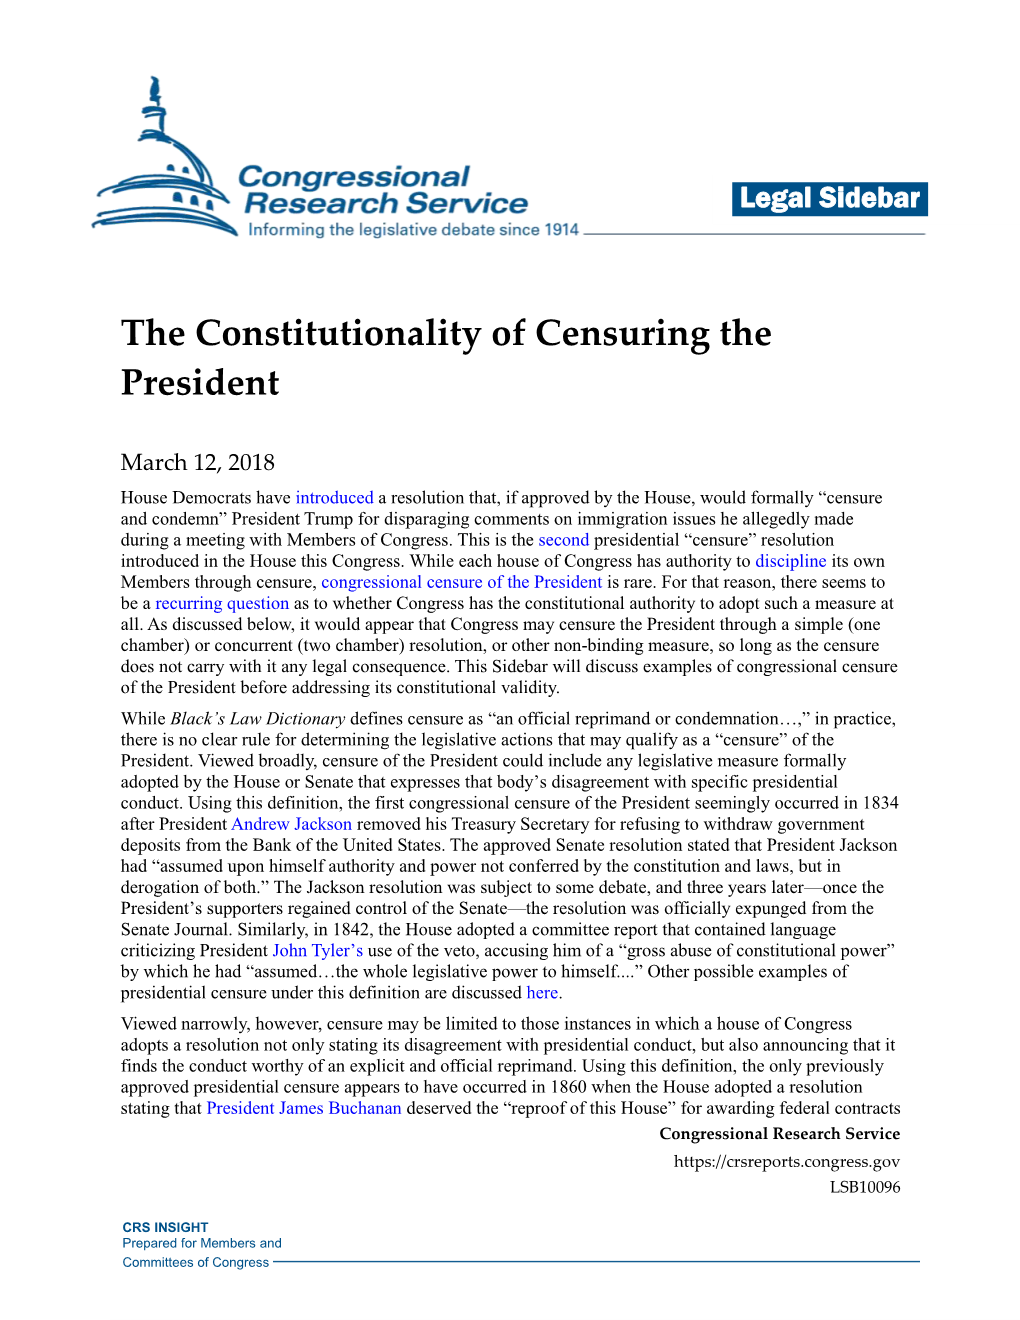 The Constitutionality of Censuring the President